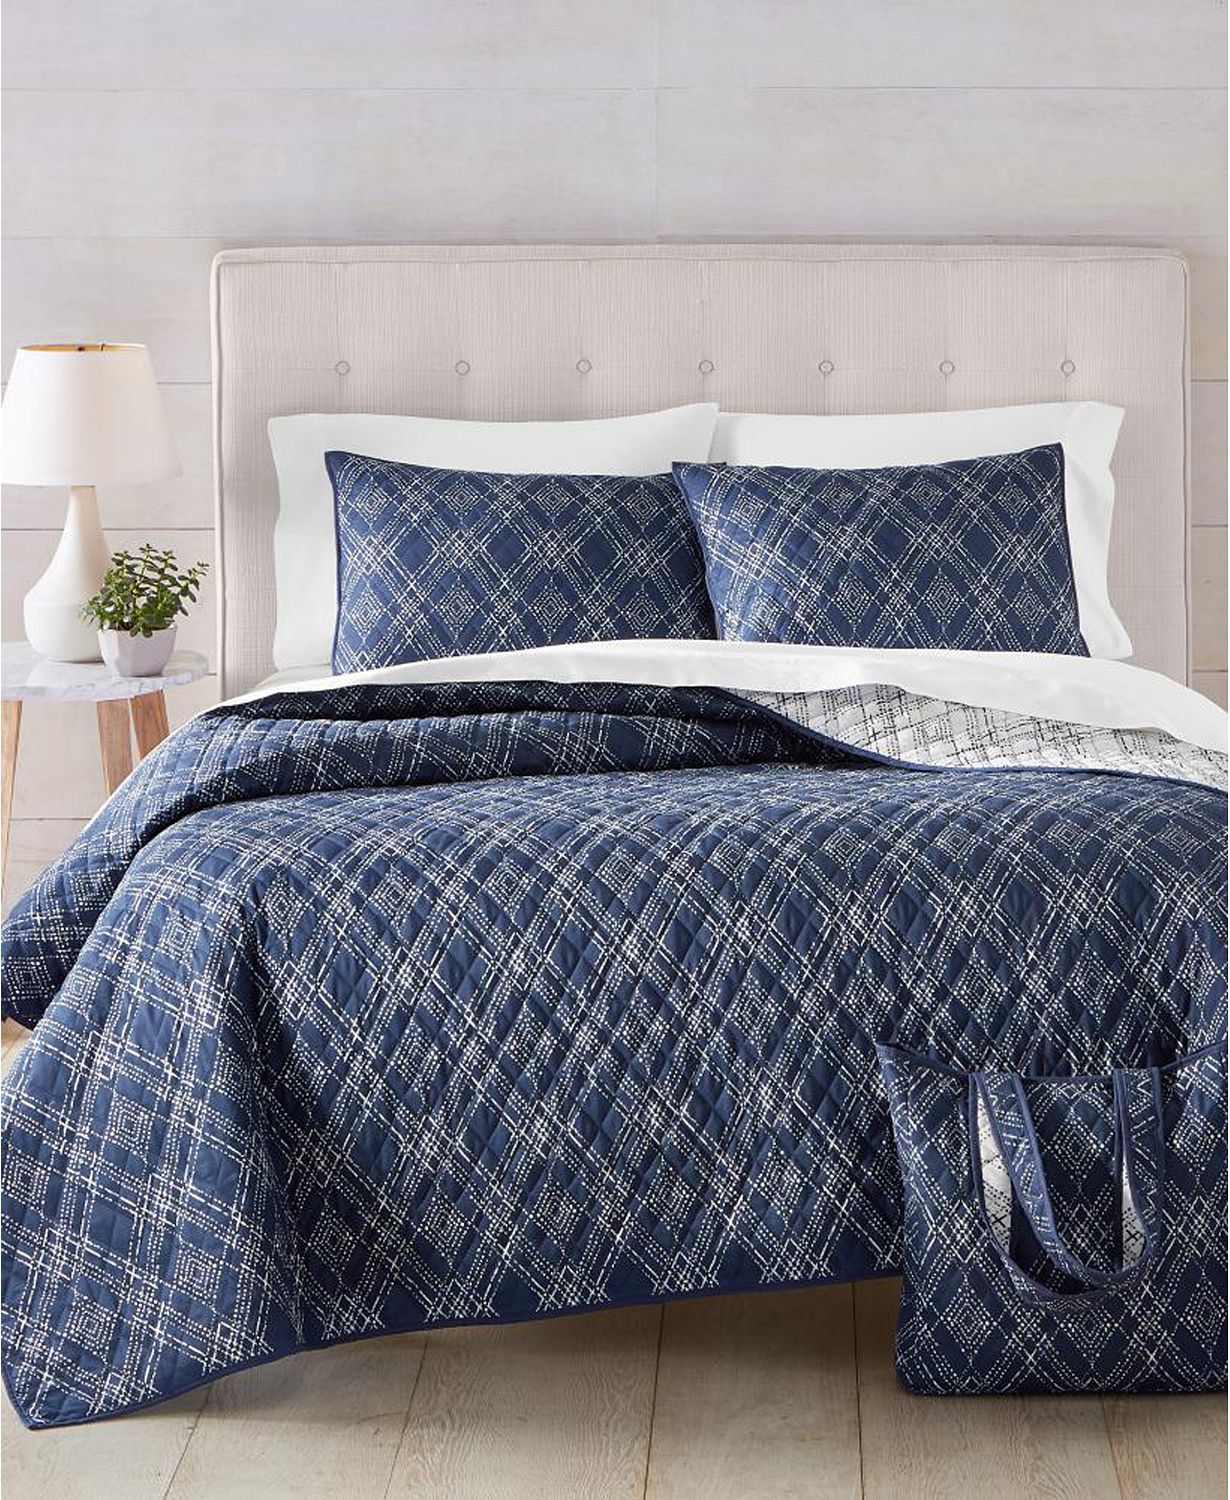 These Martha Stewart Quilt Sets Are Half Off The Daily Caller